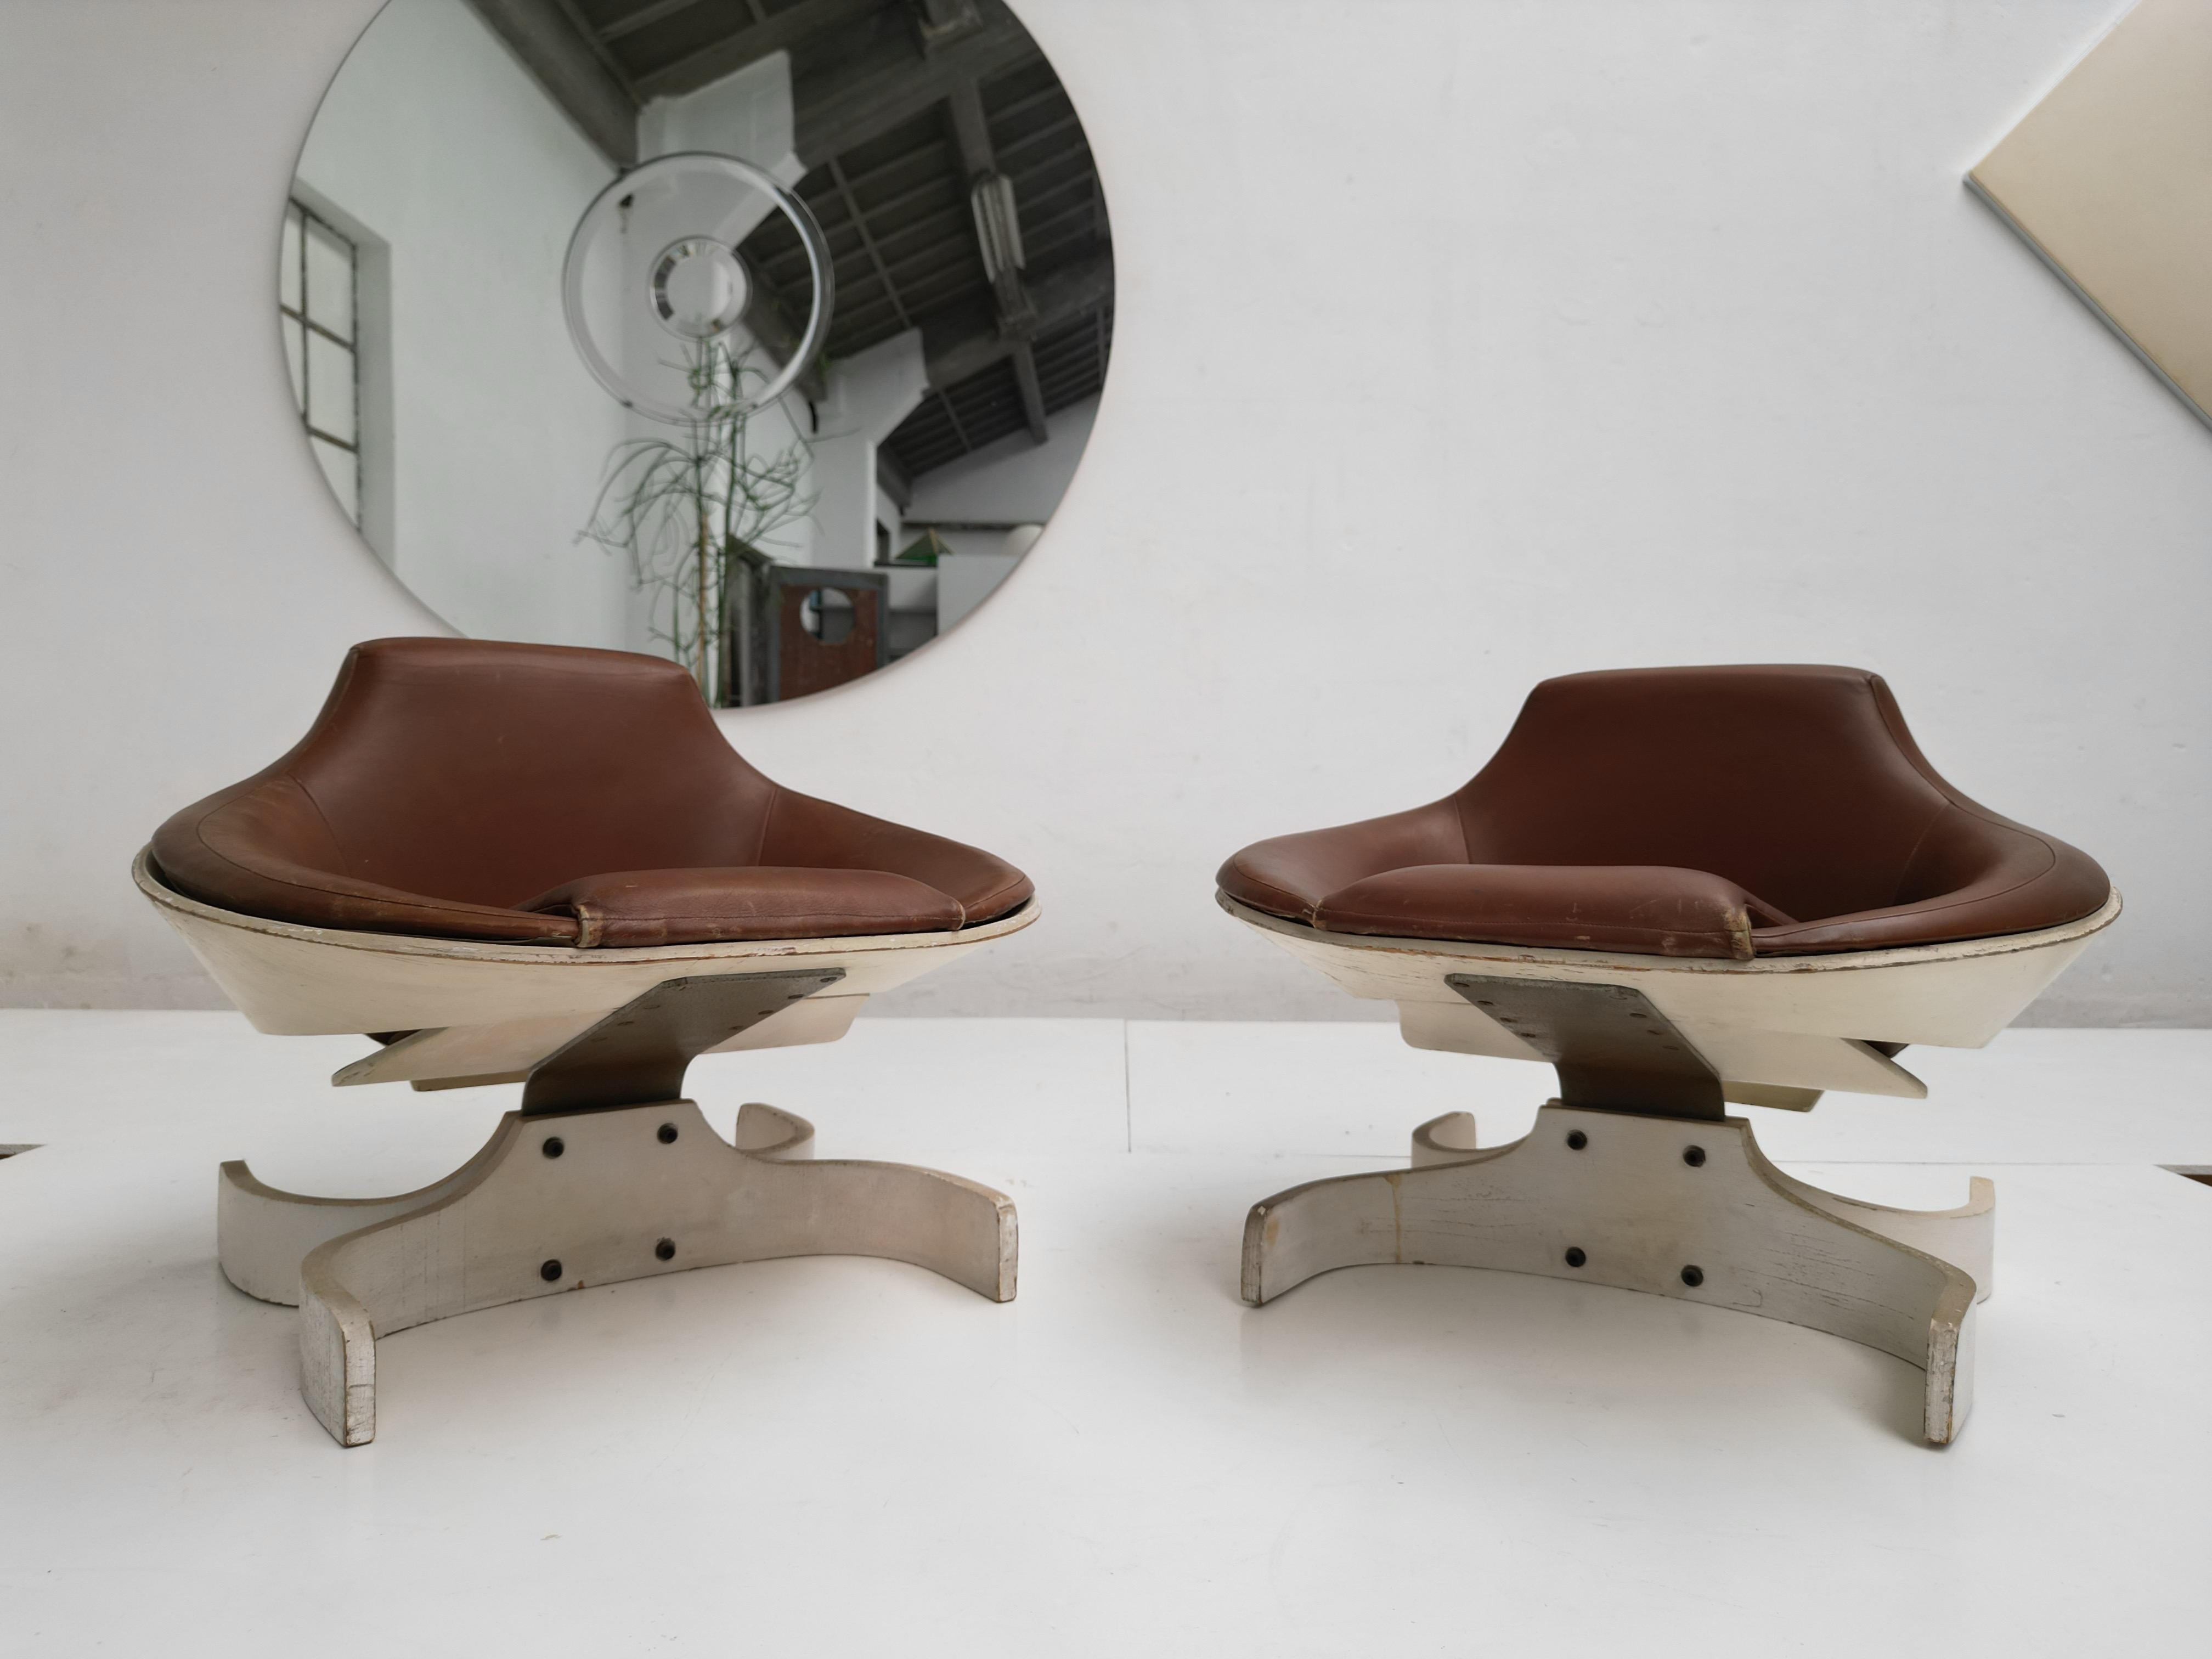 Super Rare Pair of Joe Colombo 'Sella 1001' Lounge Chairs by Comfort 1963 Italy In Good Condition For Sale In bergen op zoom, NL